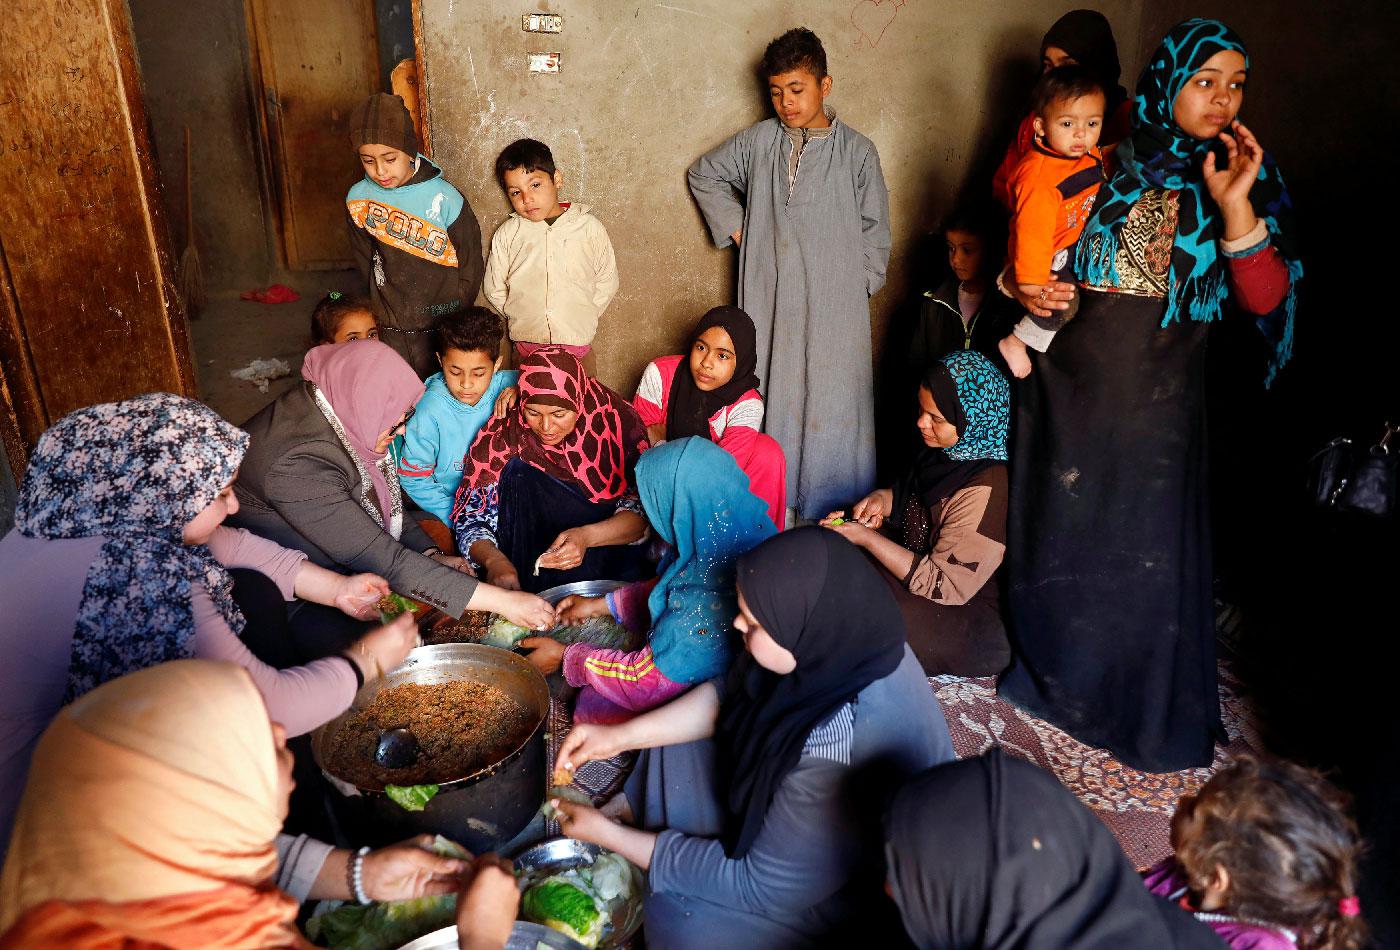 An Egyptian family prepares a cabbage meal for lunch in the province of Fayoum, southwest of Cairo, Egypt February 19, 2019.